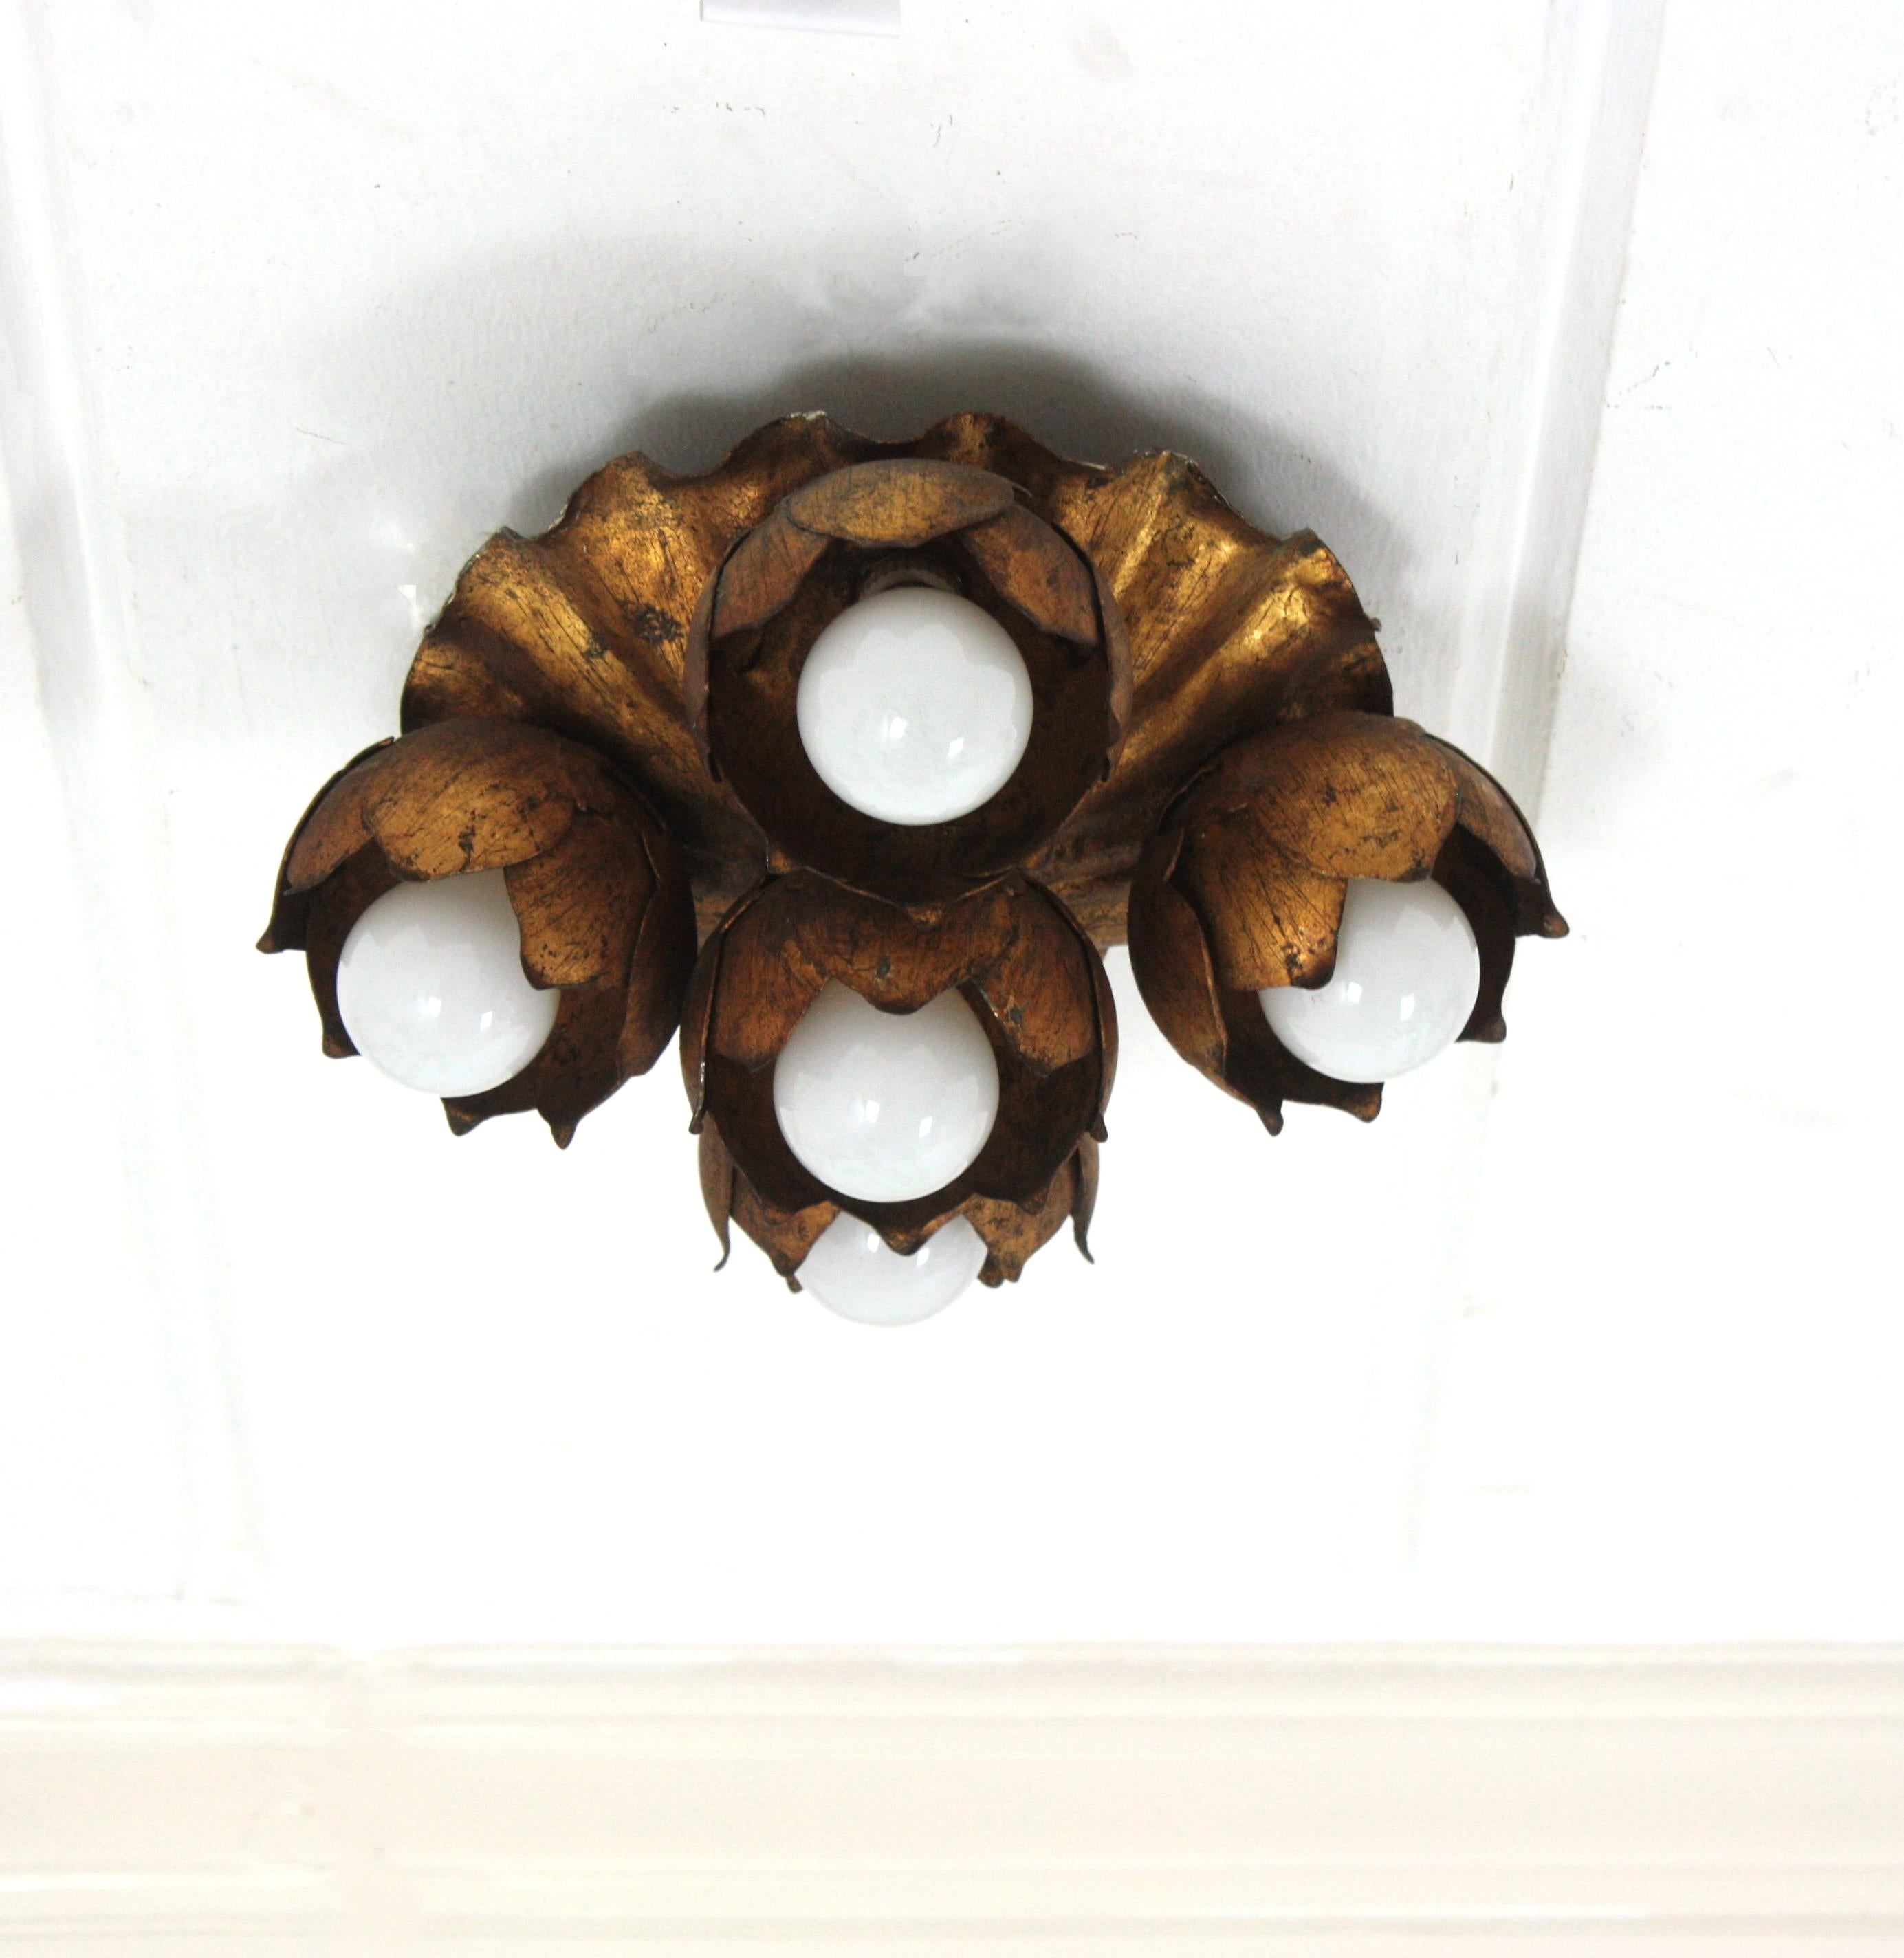 Flower bouquet ceiling light fixture / wall ligh in gilt iron

French 1940s gilt metal five light Floral Bouquet wall or ceiling light fixture. 
A beautiful Hollywood Regency gilt wrought iron floral flush mount or wall sconce. This lovely light